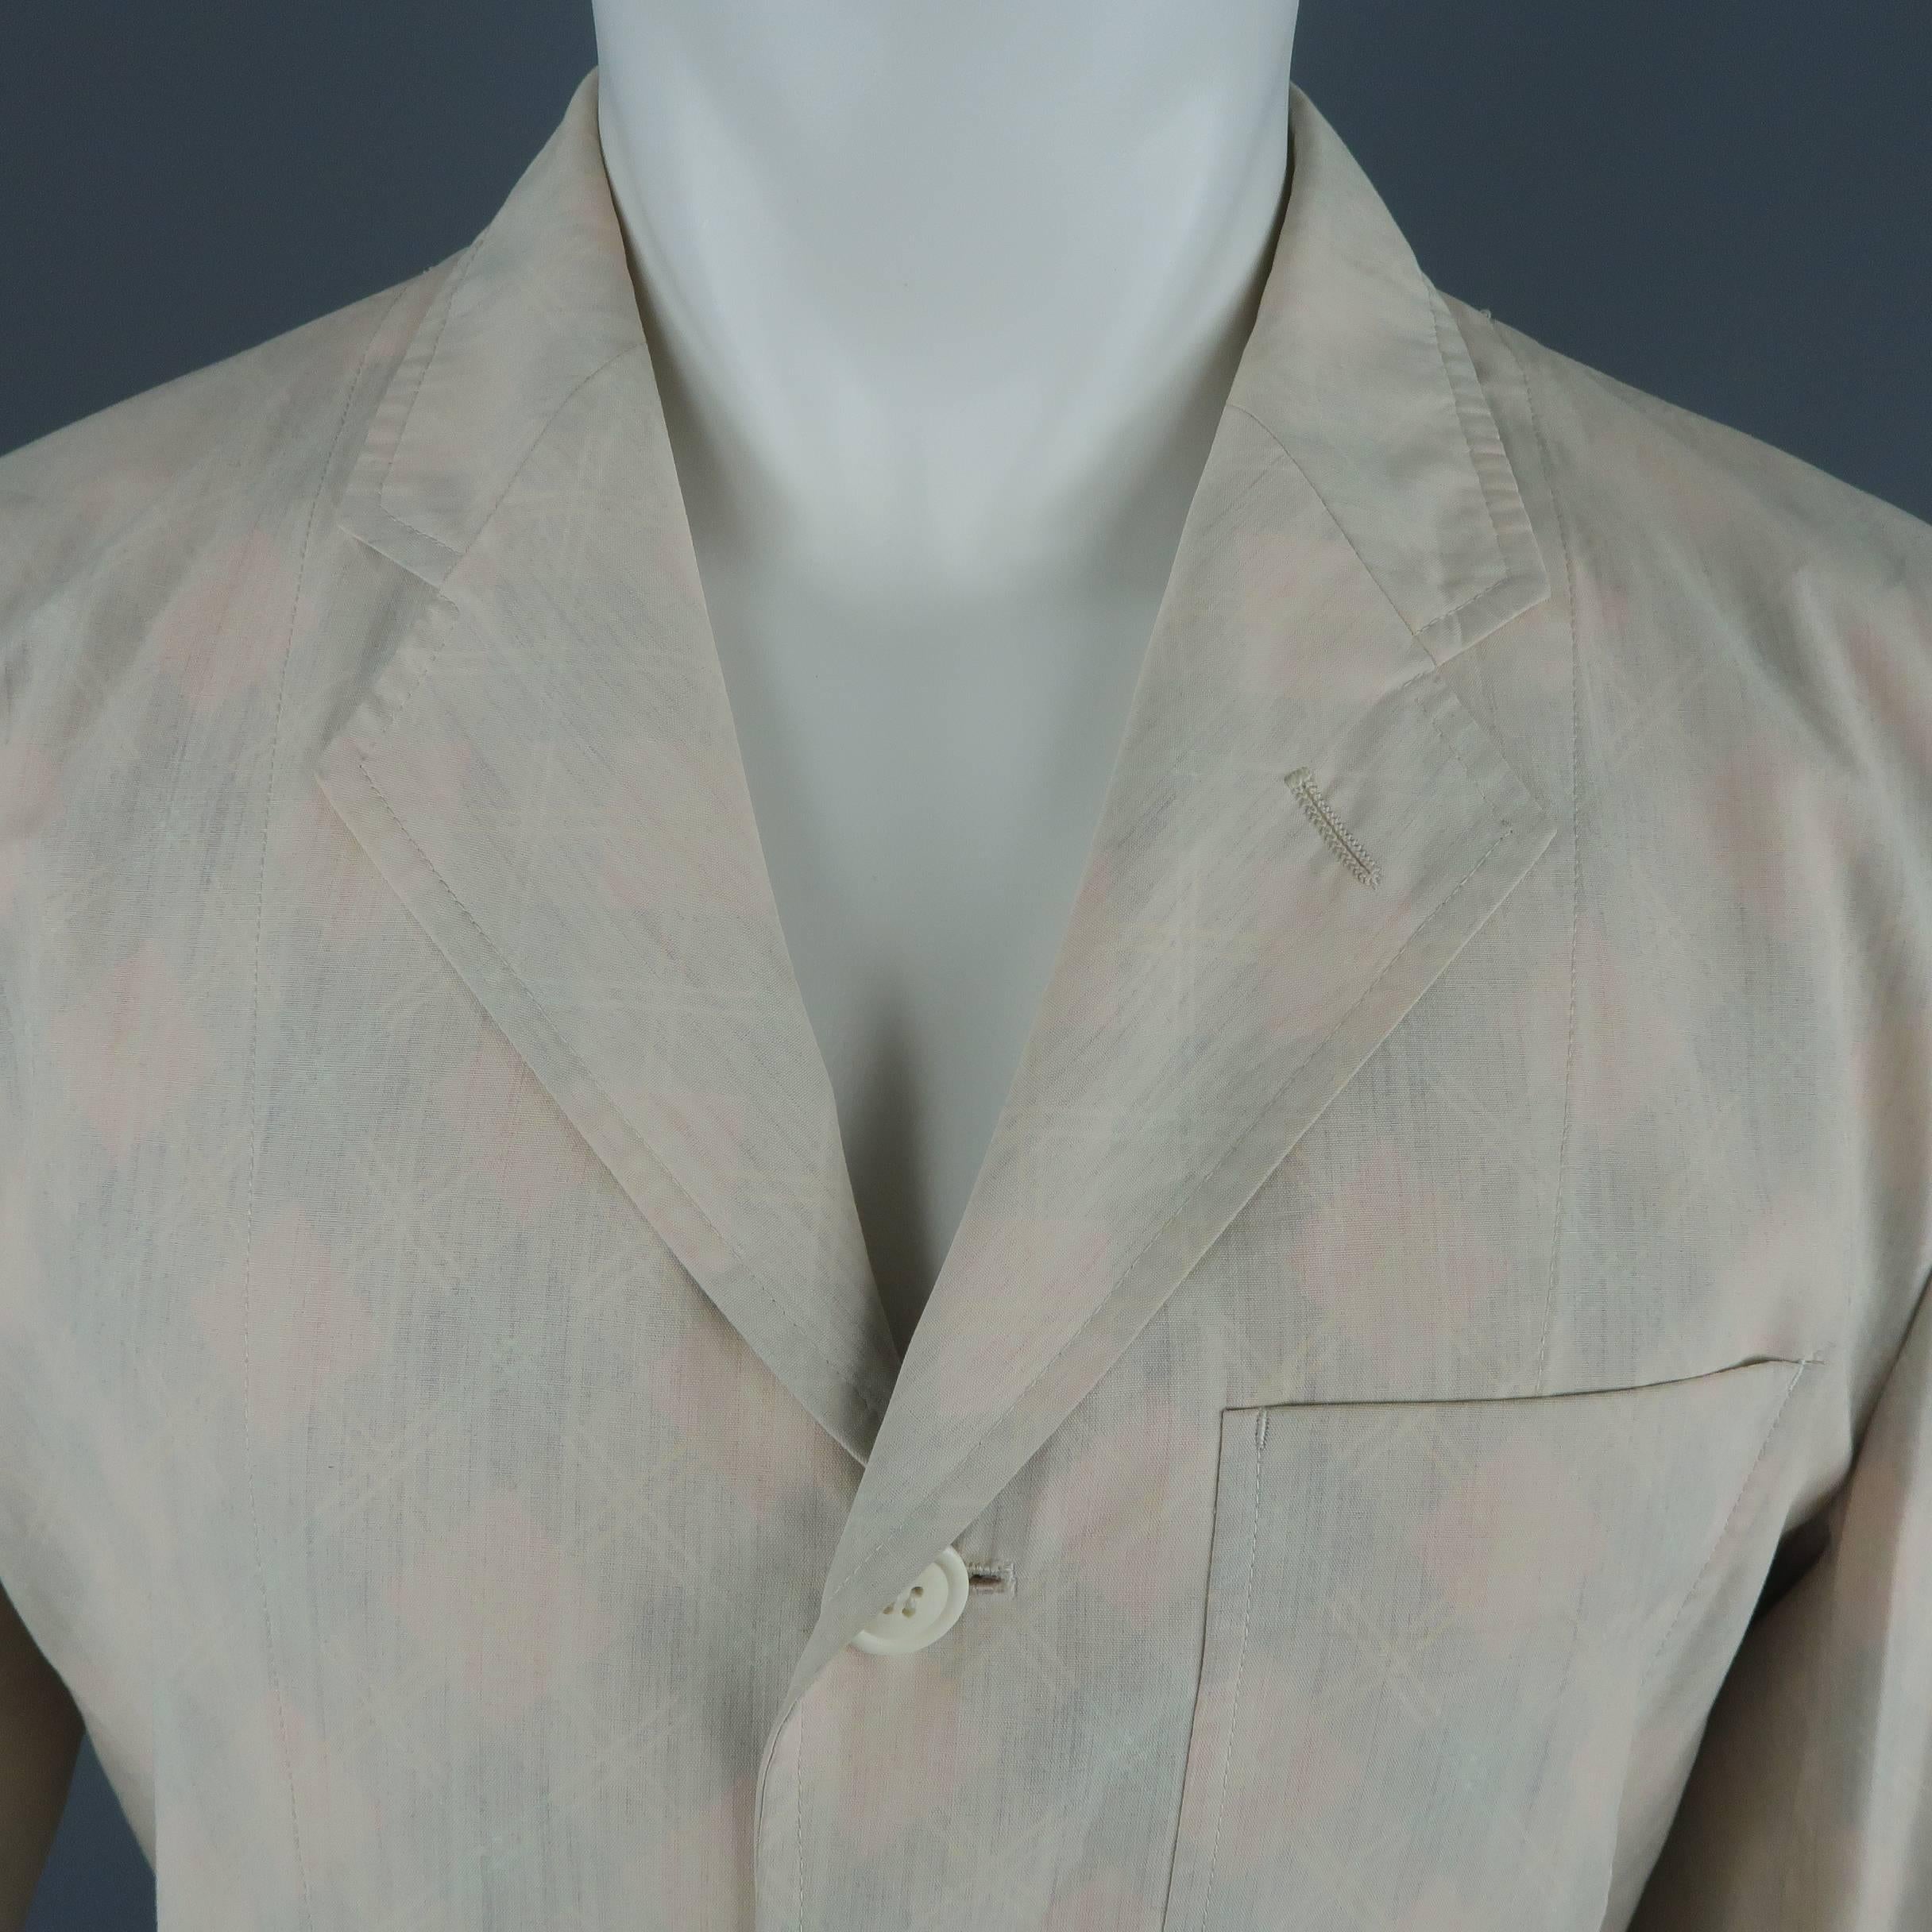 Issey Miyake Vintage single breasted sport coat comes in beige fabric with internal red argyle print faintly showing through to the exterior and features a notch lapel, three button front, and patch flap pockets. Made in Japan.
 
Good Pre-Owned